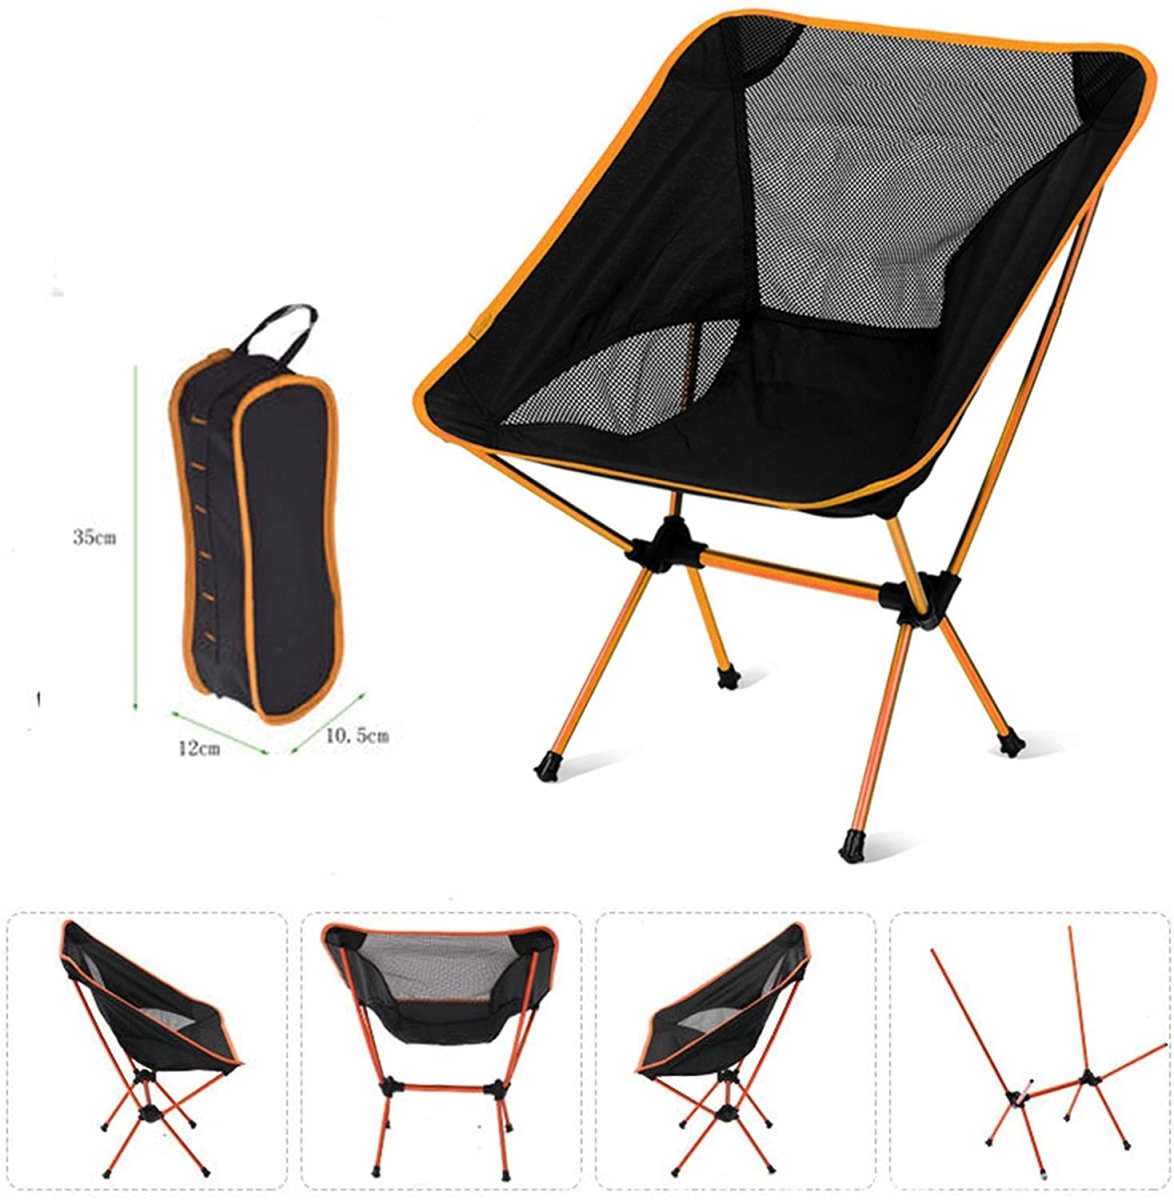 Ultralight Aluminum Alloy Folding Camping Camp Chair Outdoor Hiking Patio Backpacking Red